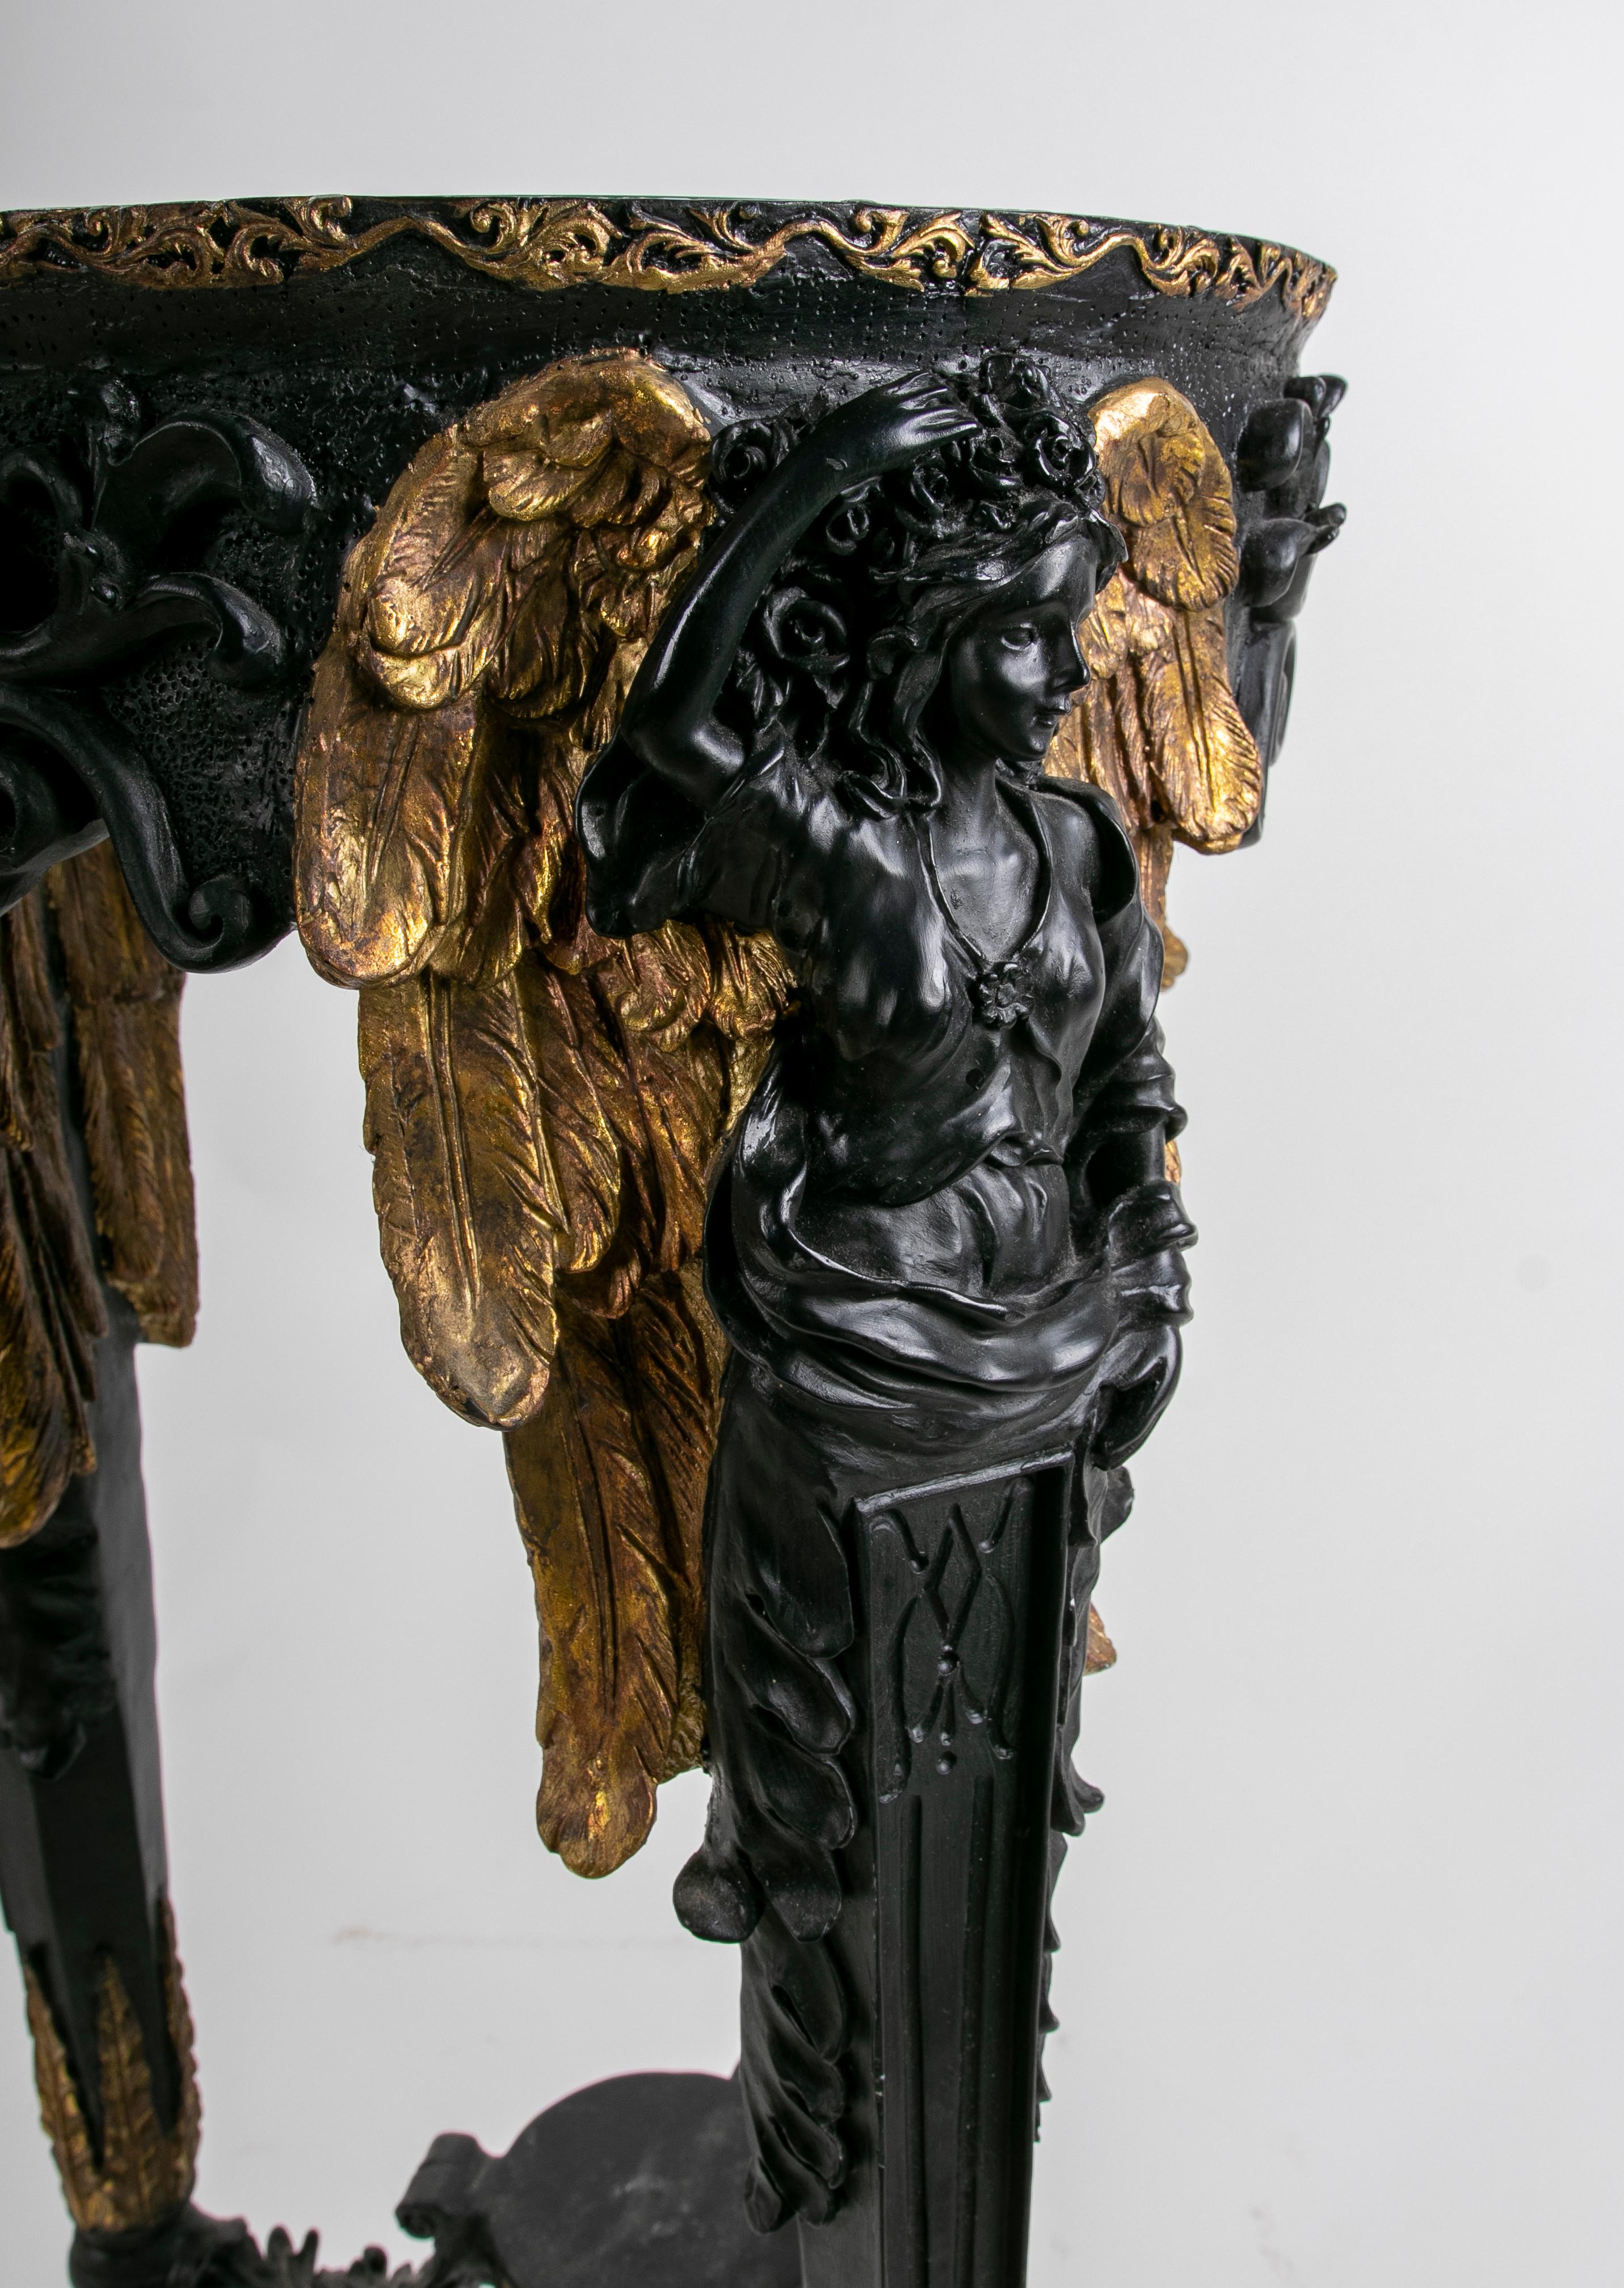 Polychromed Bronze Side Table with Winged Women on the Legs For Sale 11